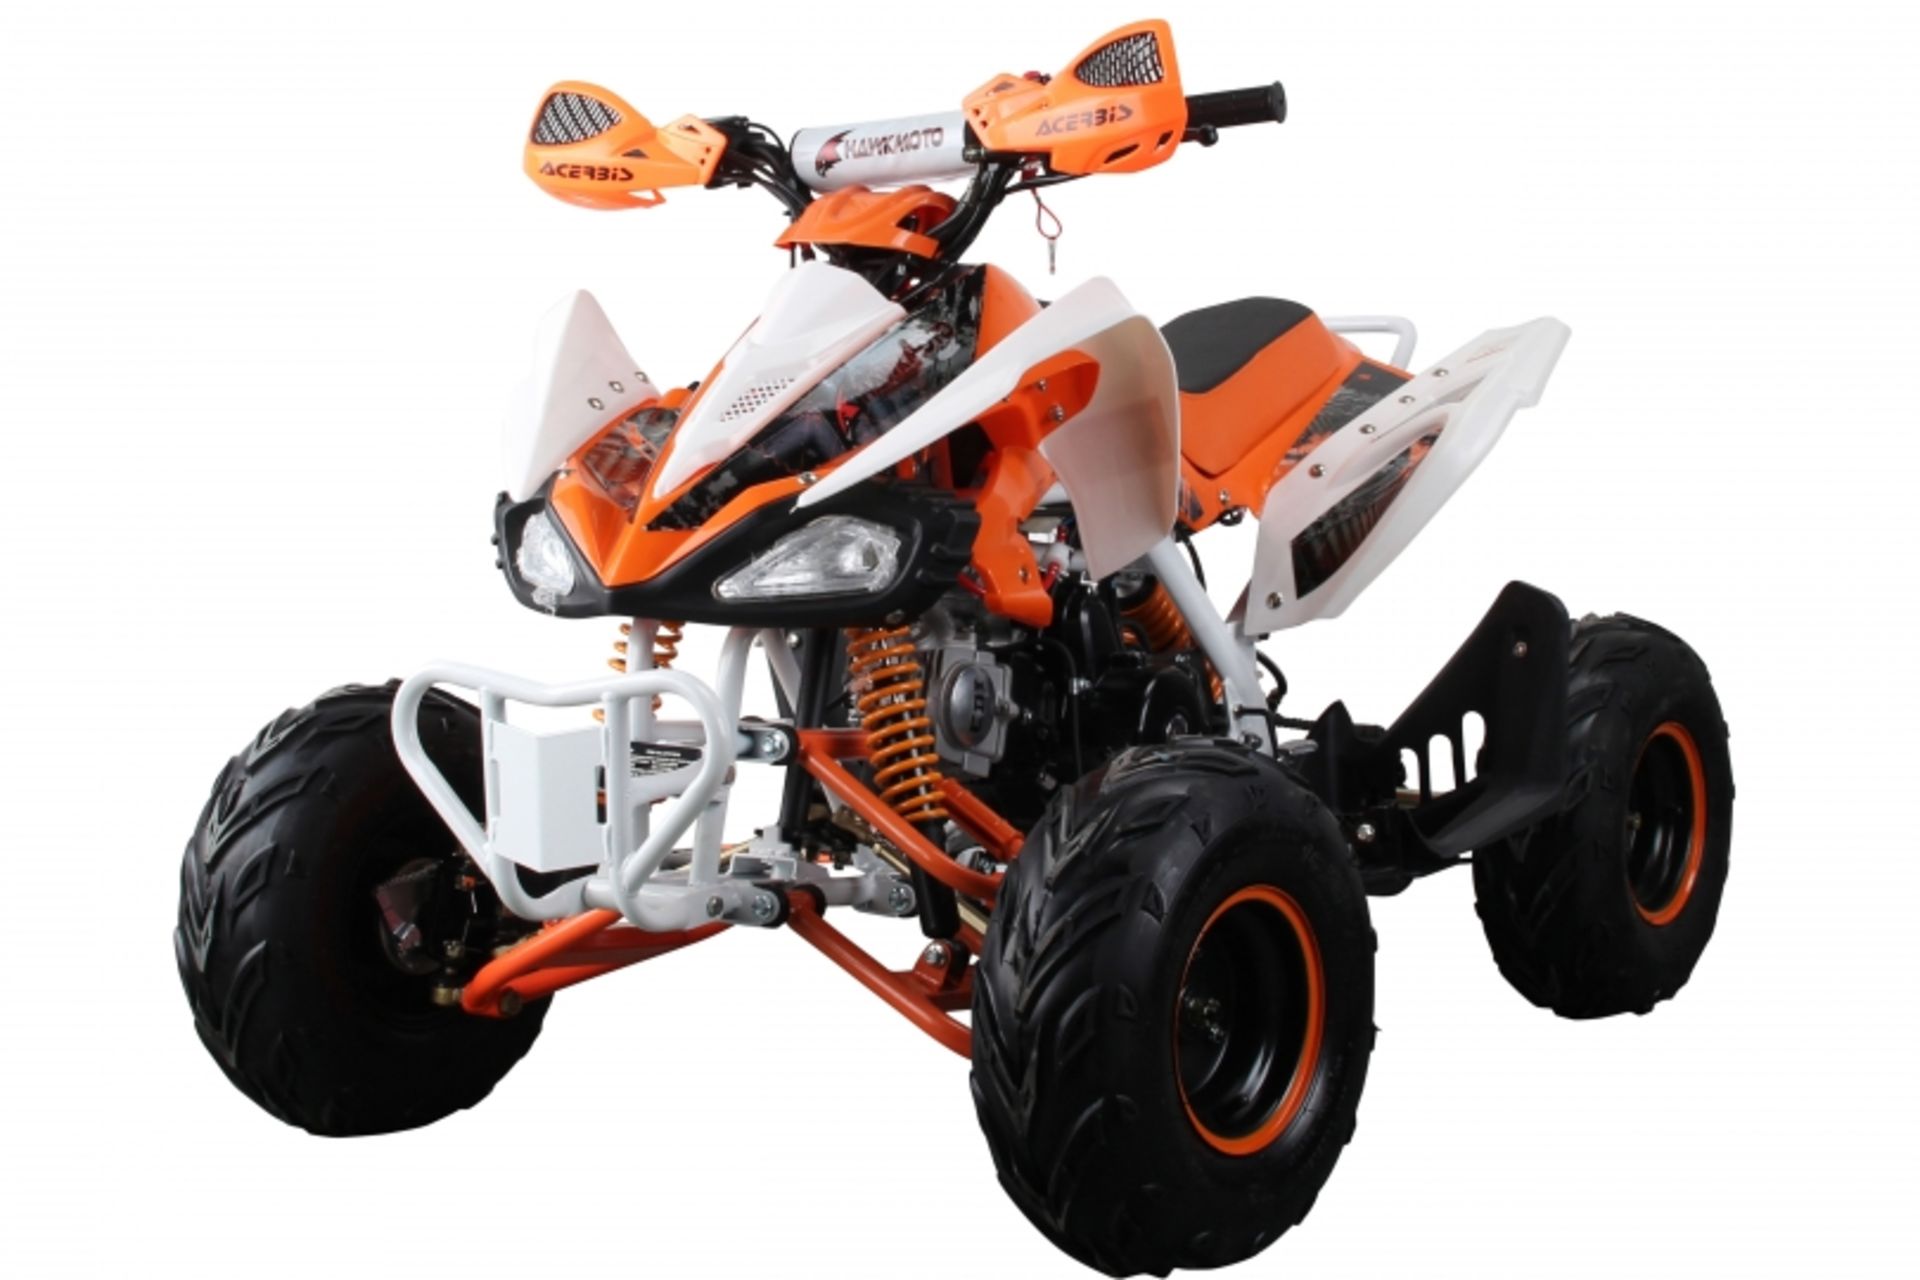 V Brand New 125cc Interceptor SV2 4 Stroke Quad Bike With Reverse Gear - Double Front Suspension/ - Image 3 of 5